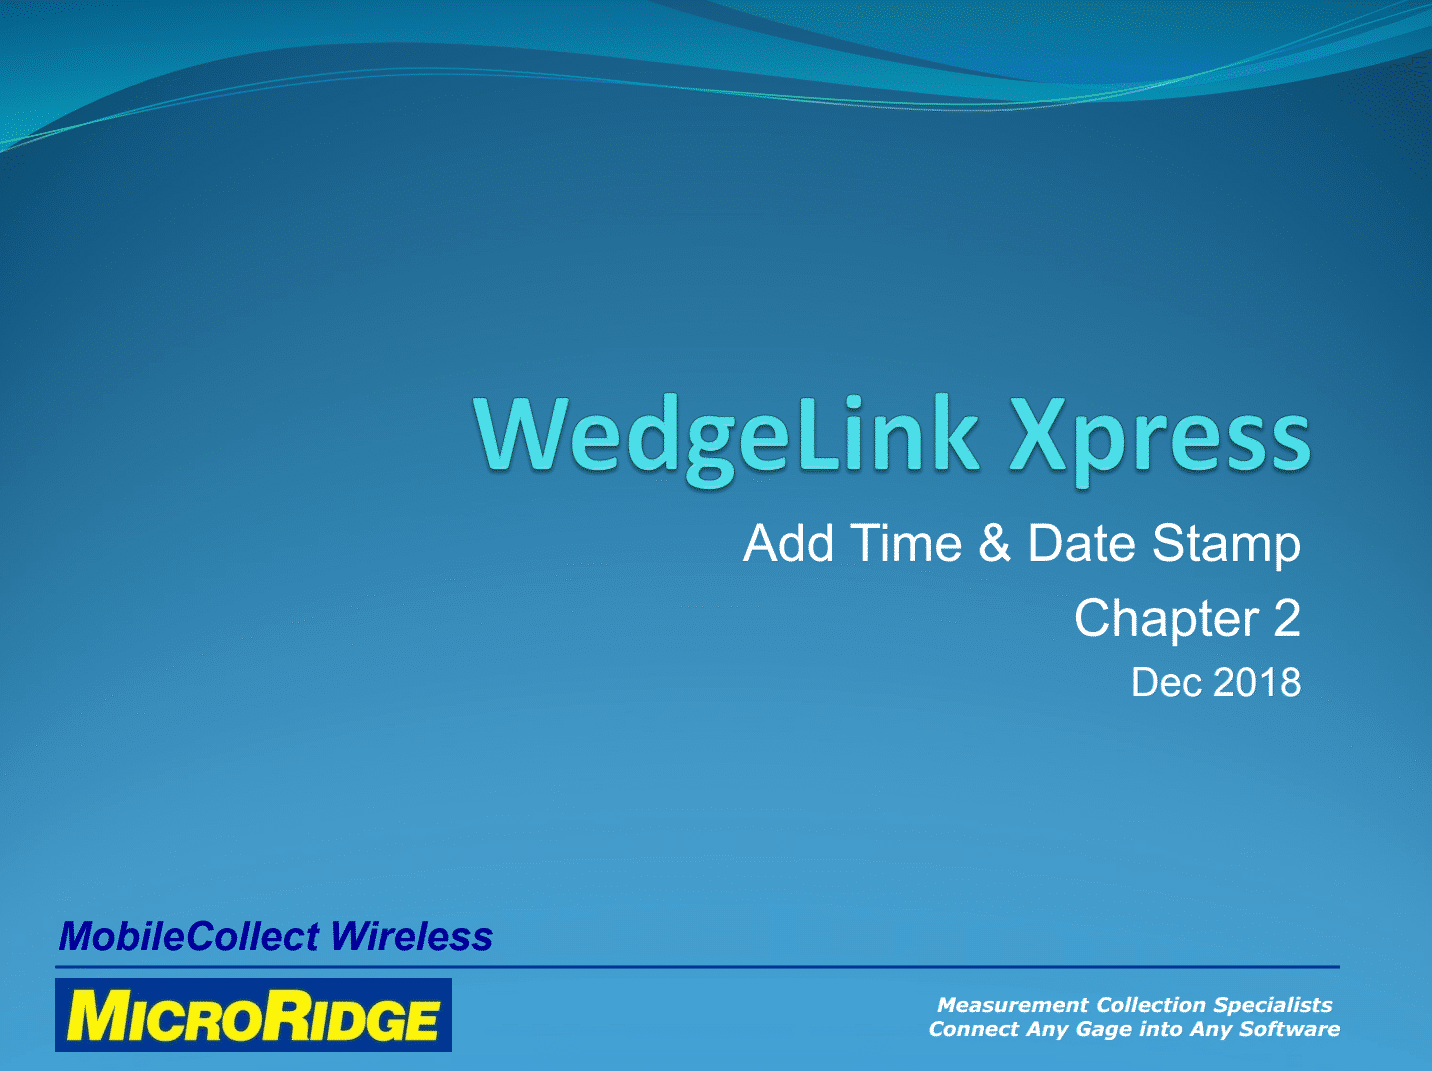 WedgeLink Xpress Chapter 2 Add Date & Time Stamp